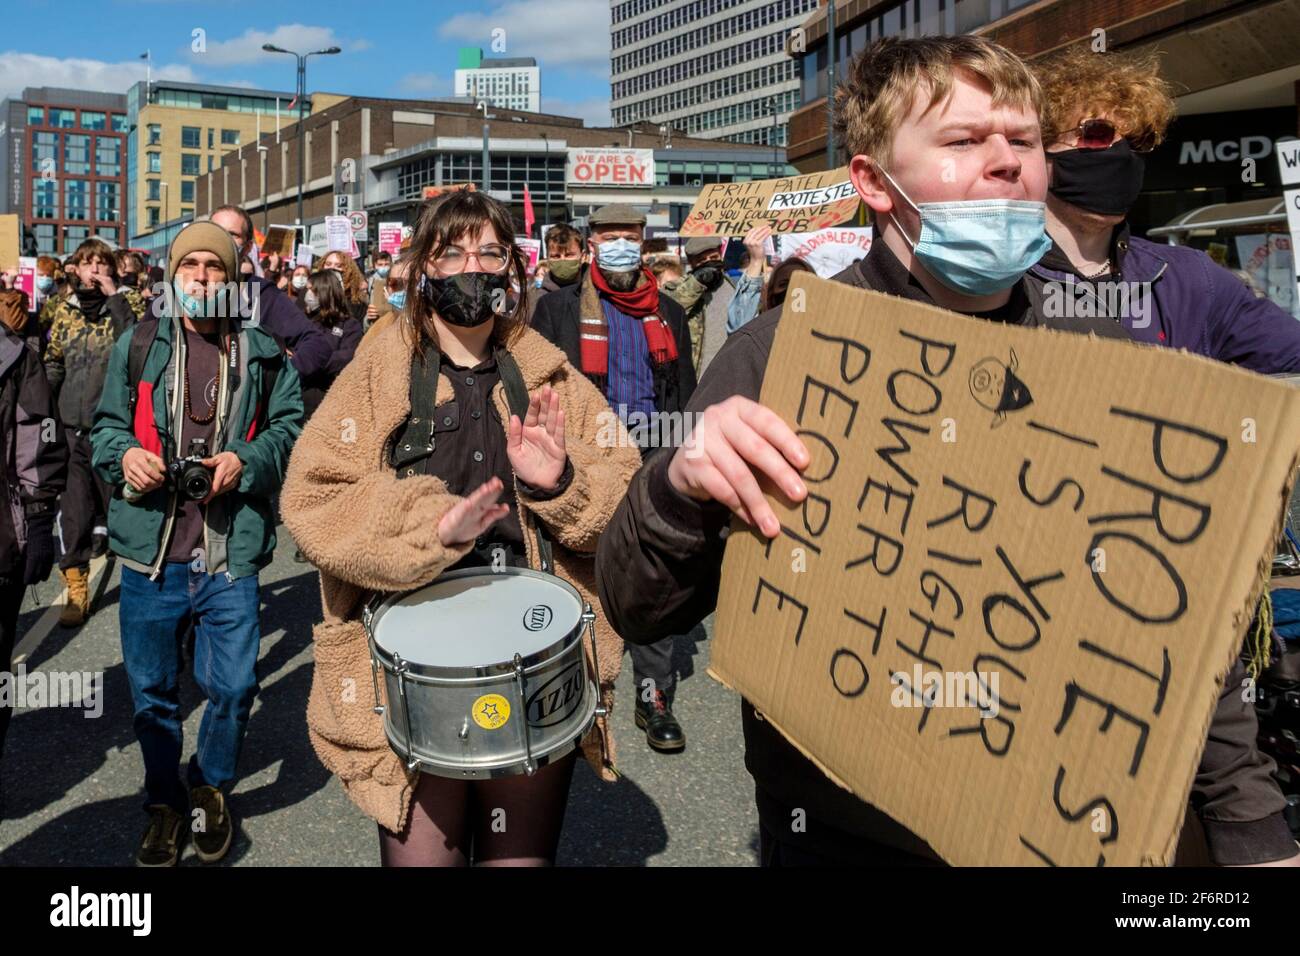 London, UK. 2nd Apr 2021. Protestors at ‘Kill The Bill’ protest against the Police, Crime, Sentencing and Courts Bill, in Leeds, north of England on Good Friday, April 2nd, 2021. Credit: Mark Harvey/Alamy Live News Stock Photo